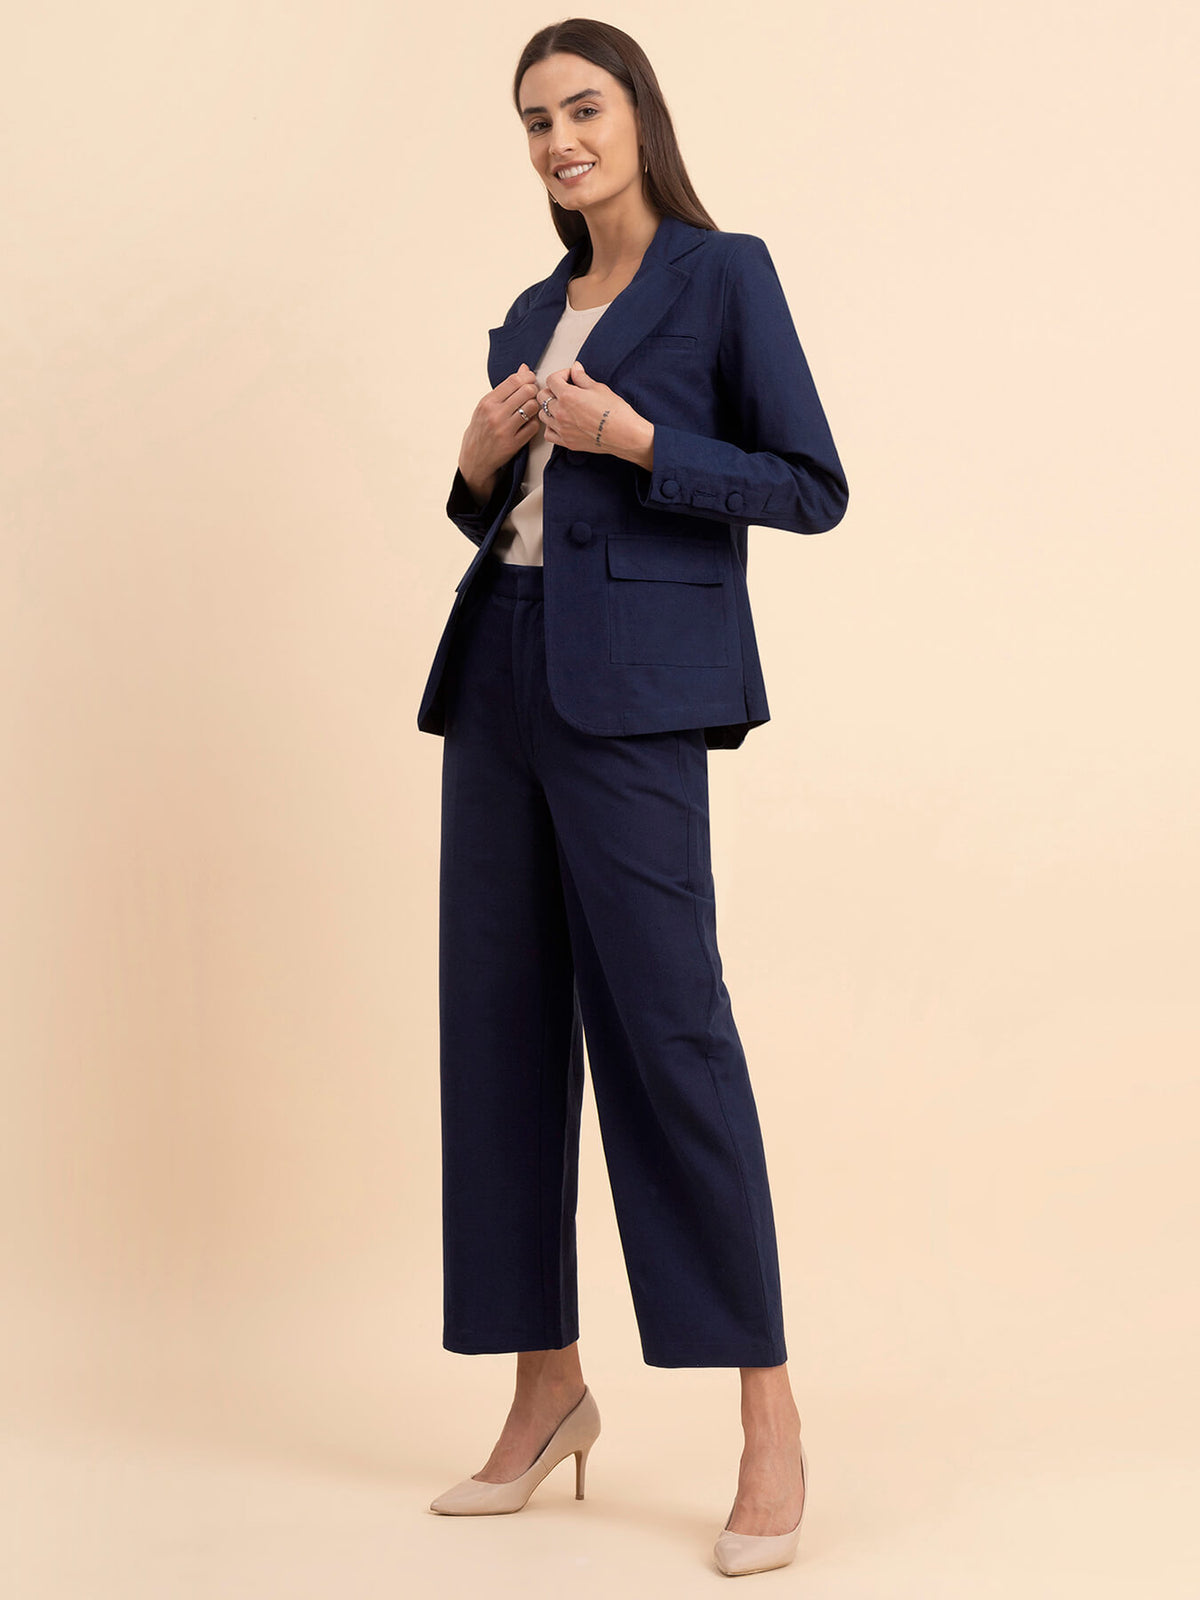 Linen Blazer and Trousers Co-ord - Navy Blue